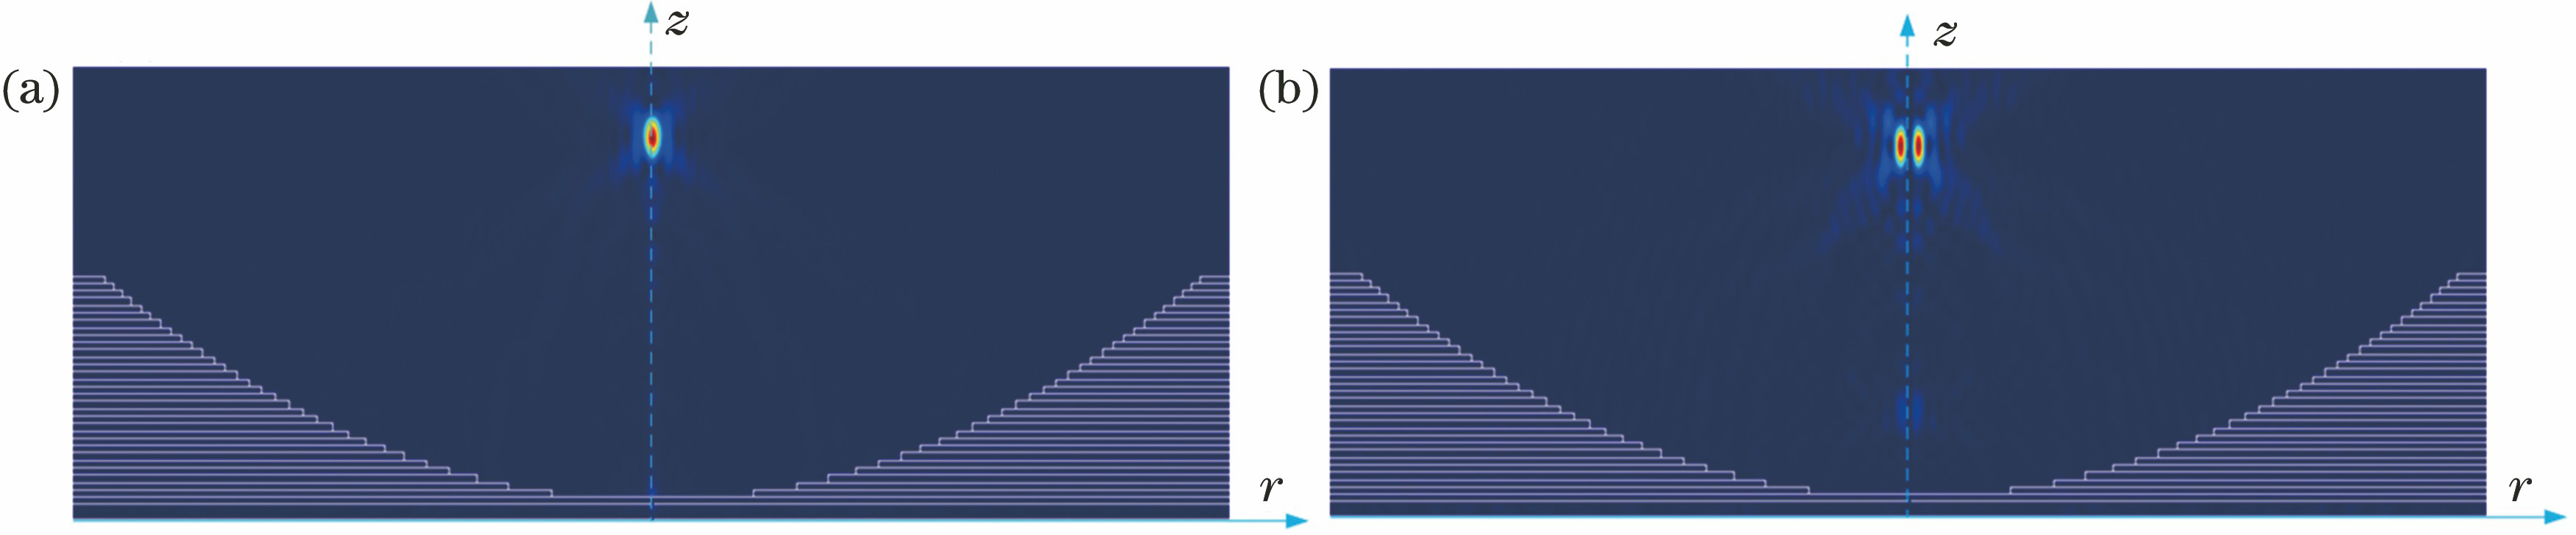 Intensity distributions of focal field with predetermined f=8 μm. (a) Radial polarization incidence; (b) azimuthal polarization incidence